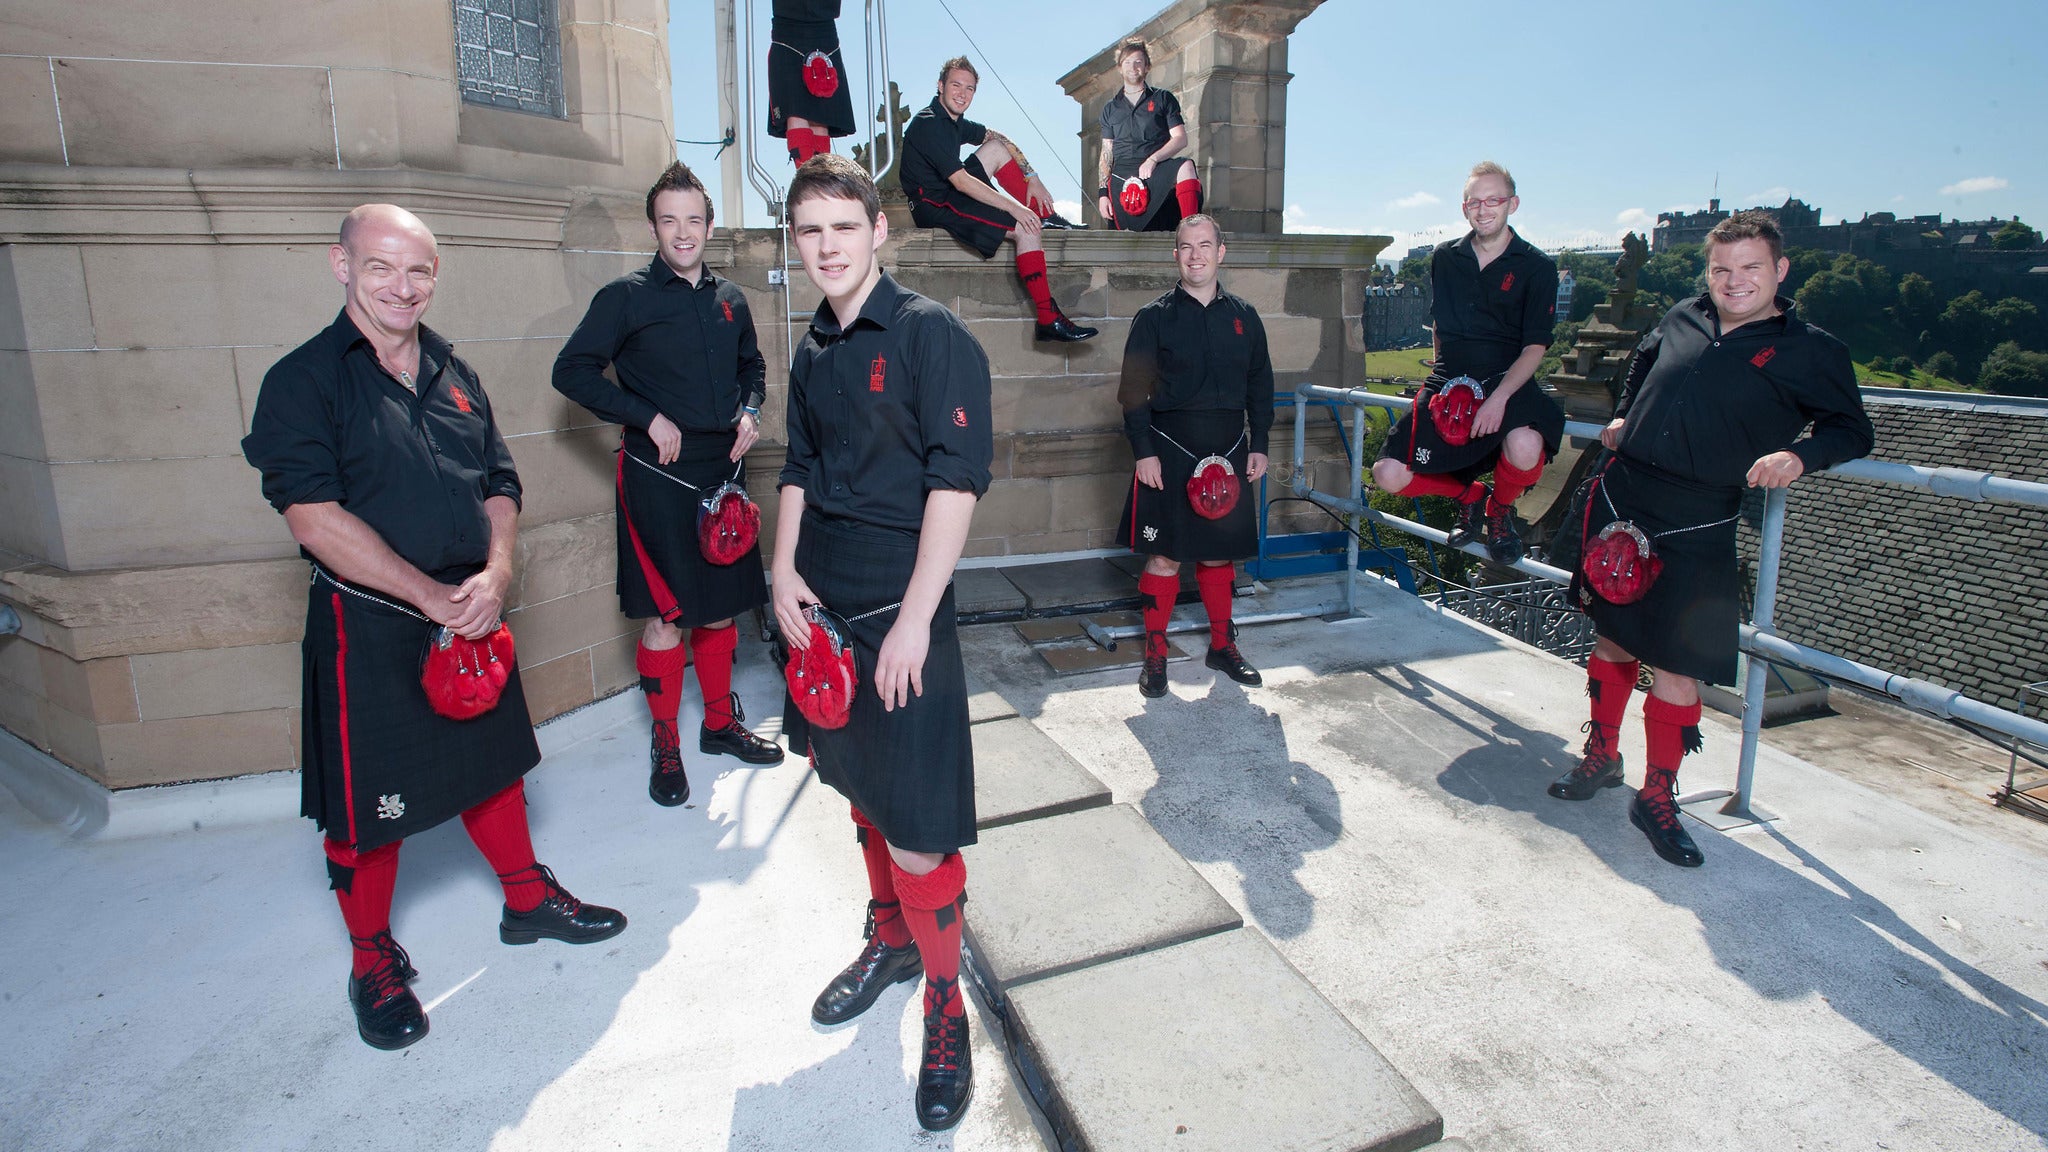 Red Hot Chilli Pipers at Ridgefield Playhouse - Ridgefield, CT 06877